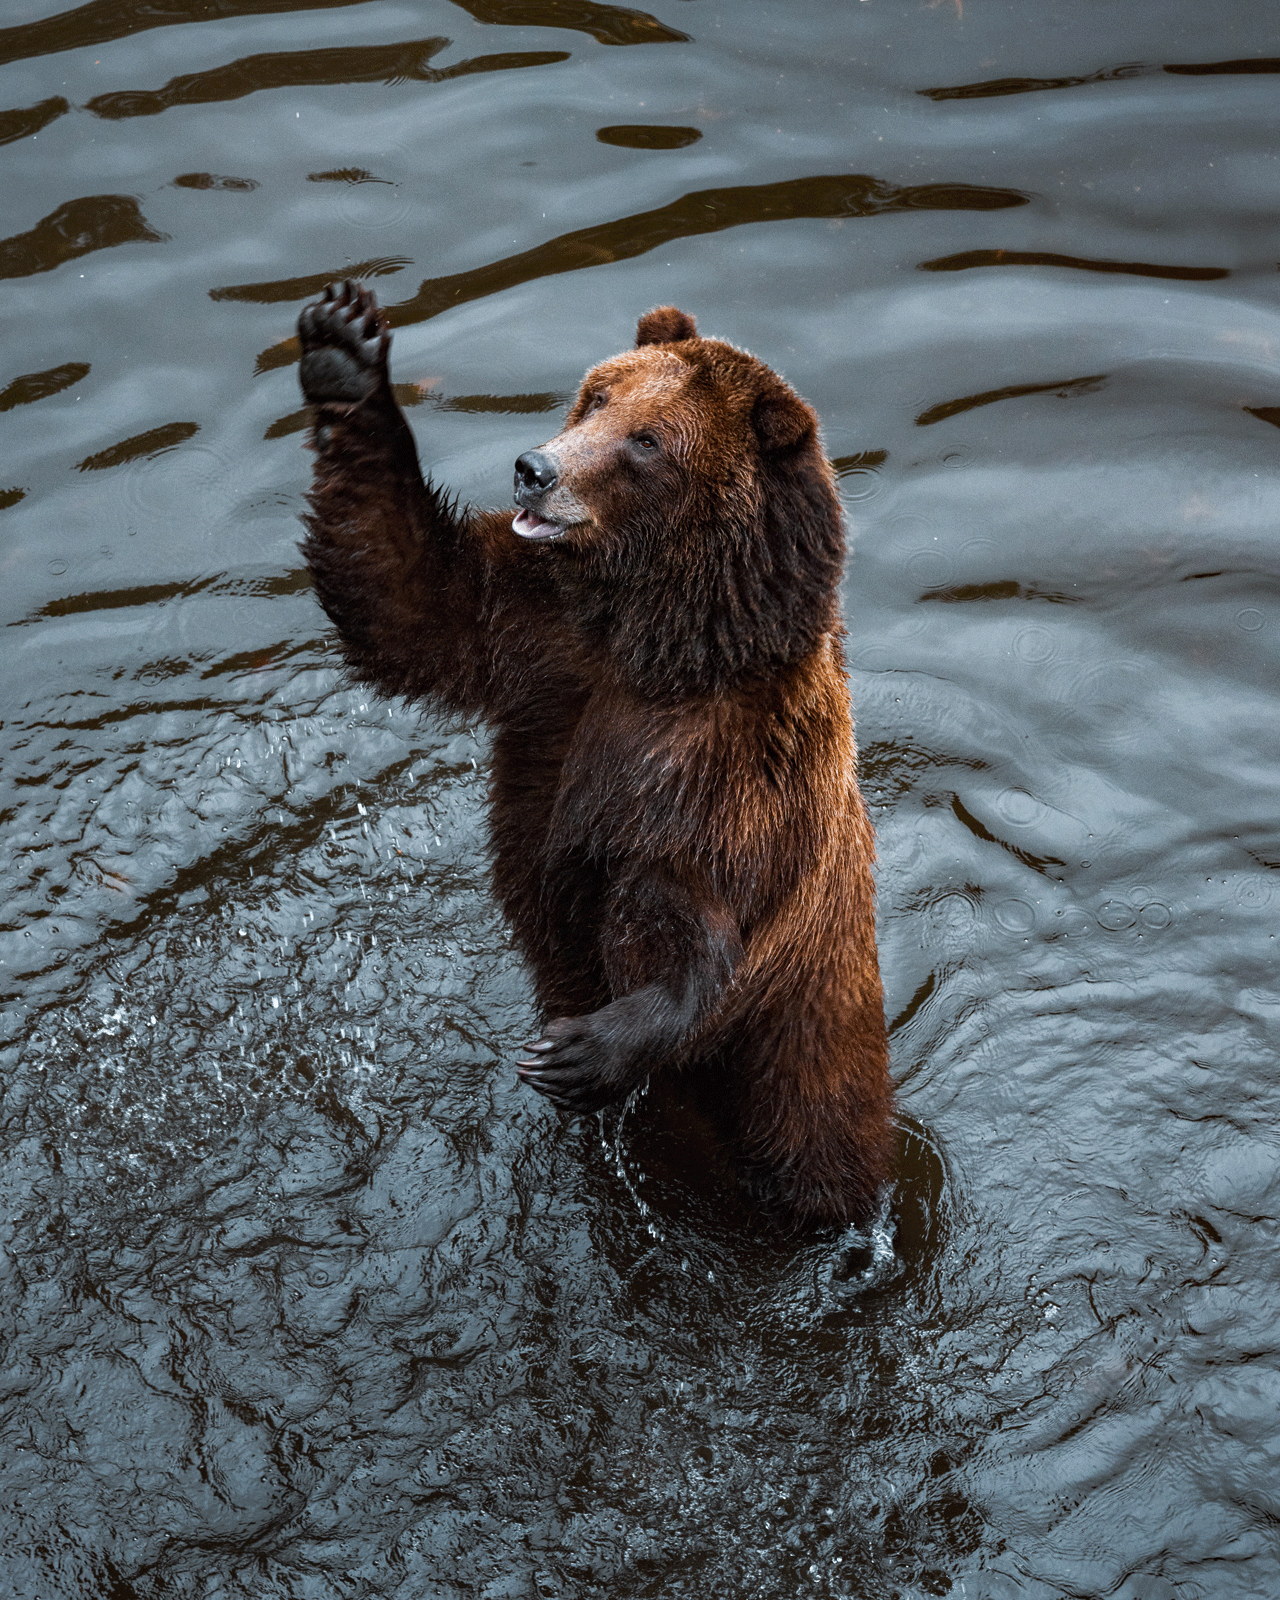 A brown bear stands upright in shallow water with its right front paw raised, as if waving. The bear's mouth is slightly open, and ripples surround it in the dark, reflective water.